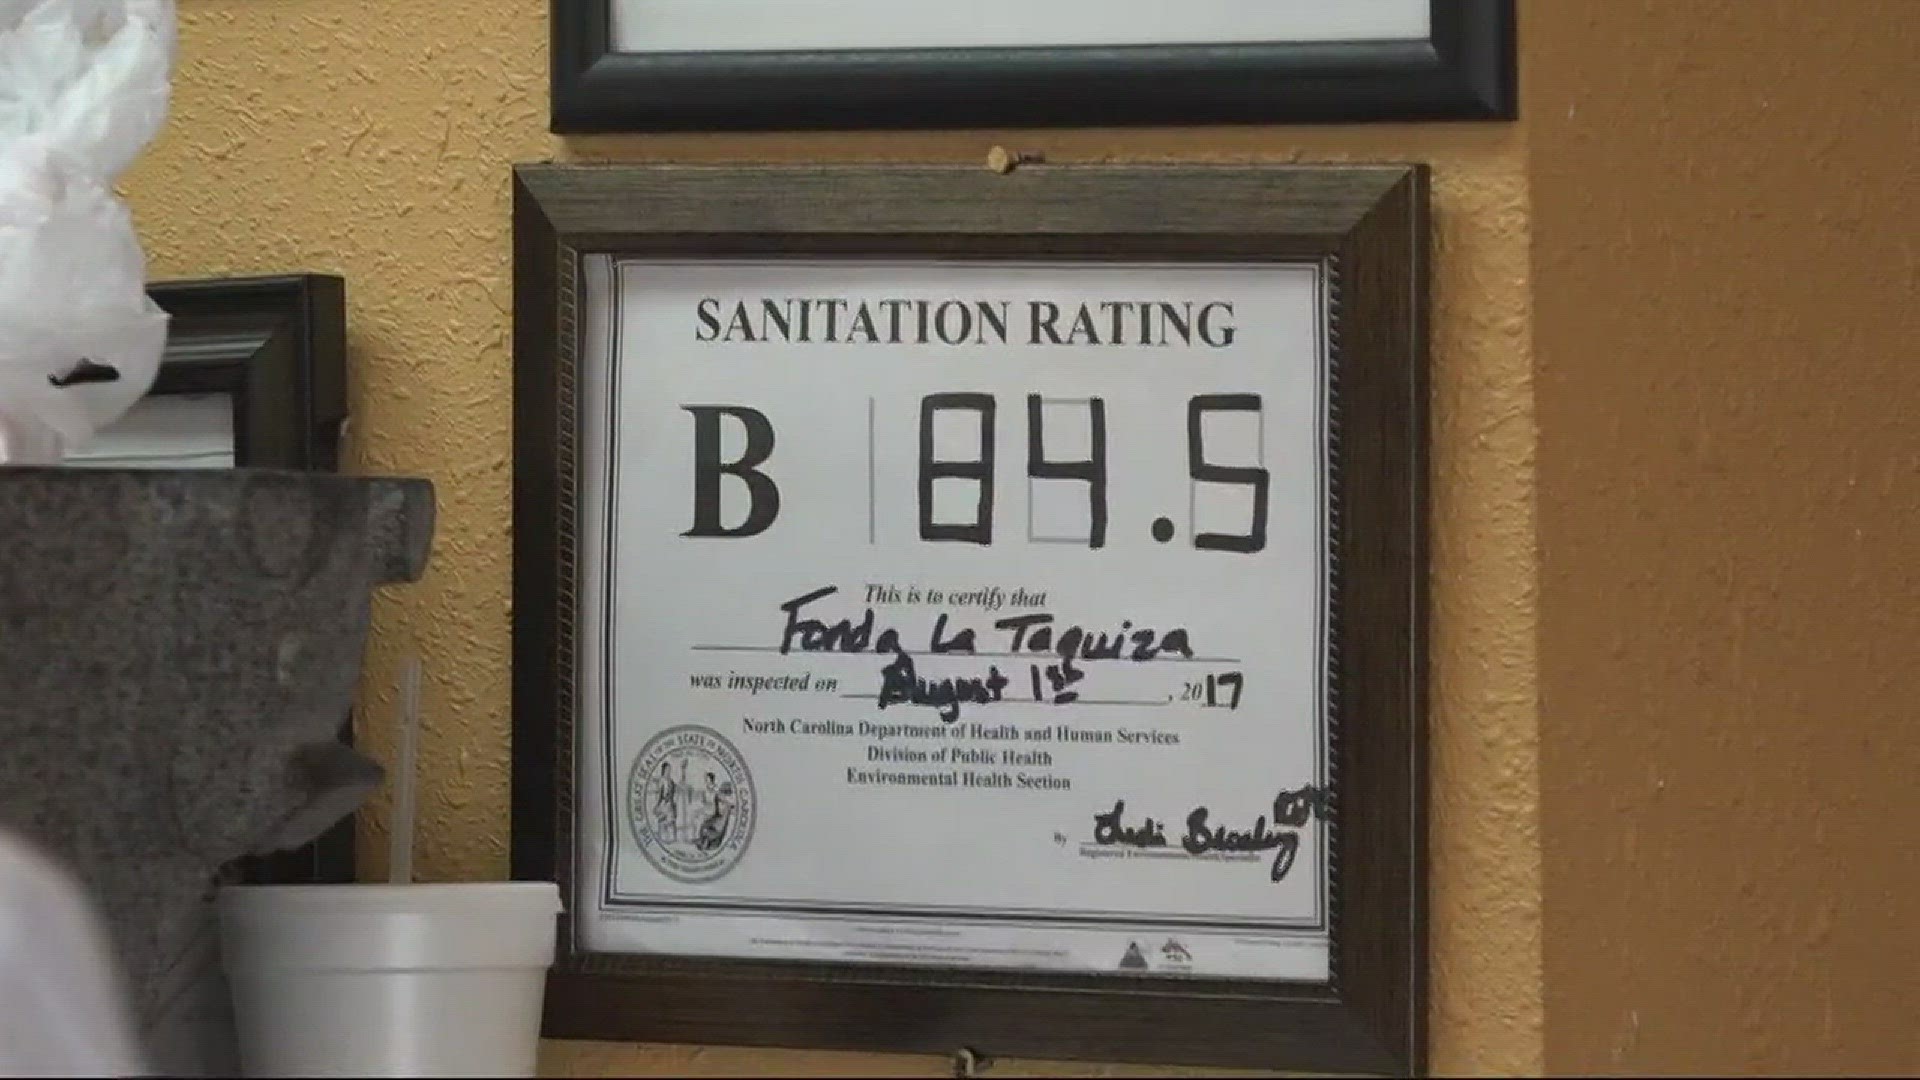 A mexican restaurant had cracks in walls and too many pests, but they are not fans of the Restaurant Report Card.